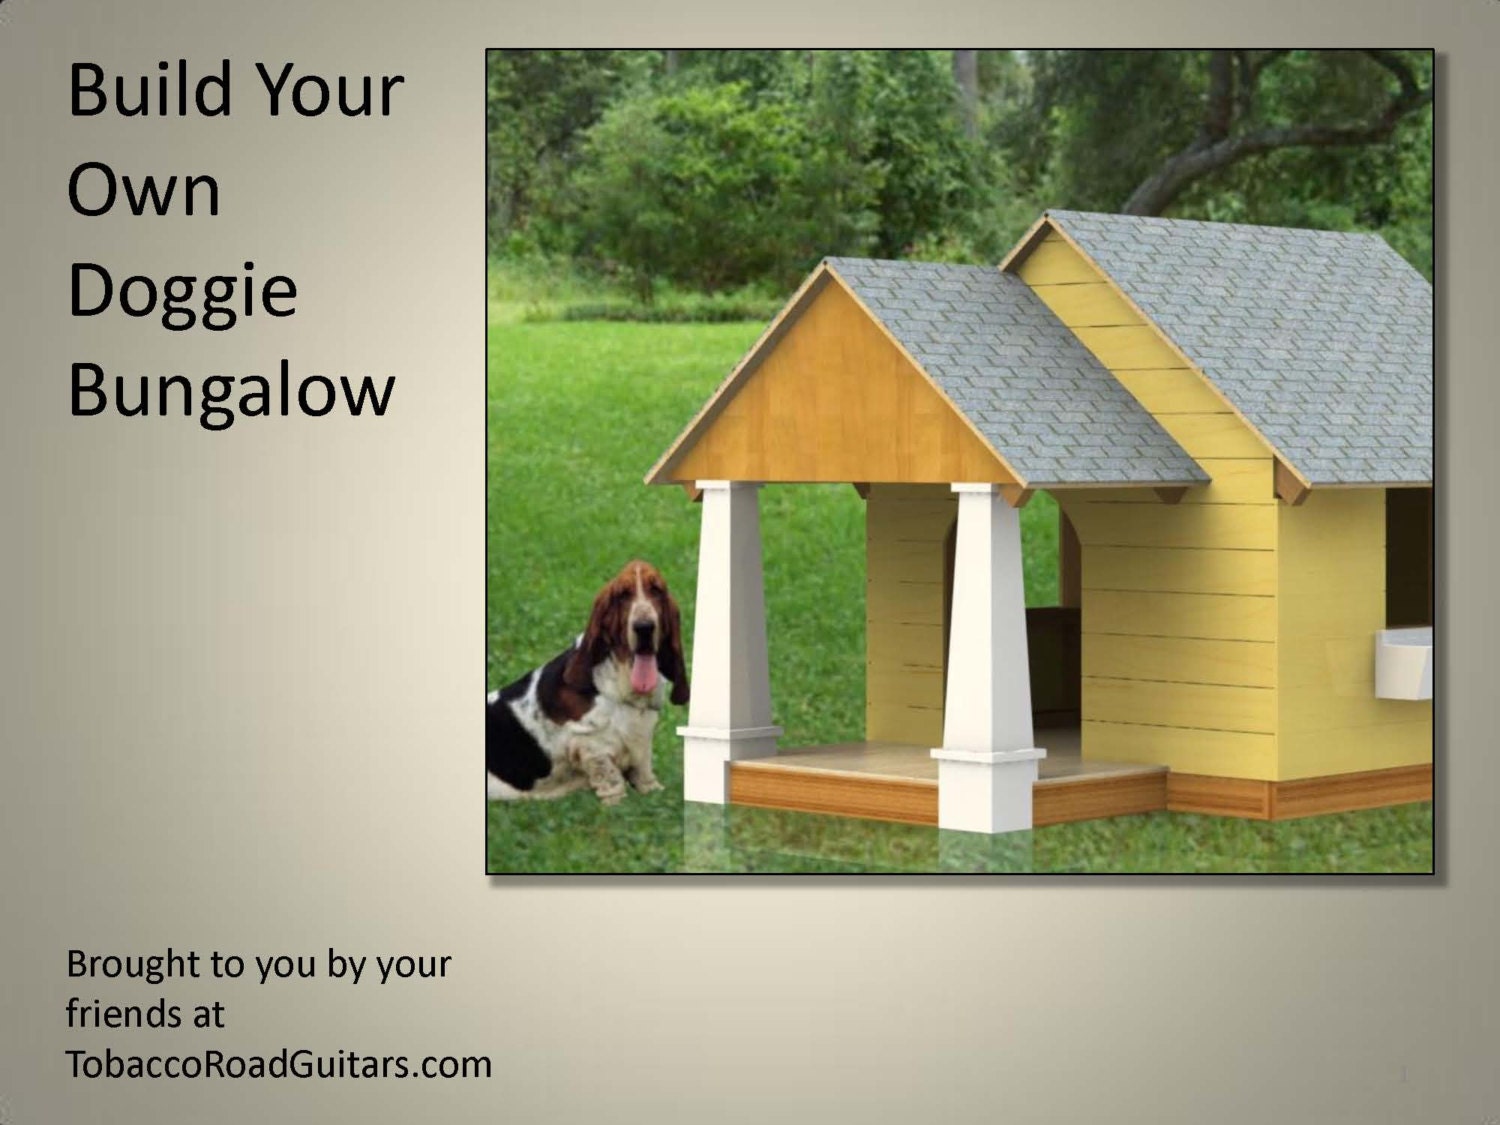 Dog House Bungalow Plans and Instructions by TobaccoRoadGuitars